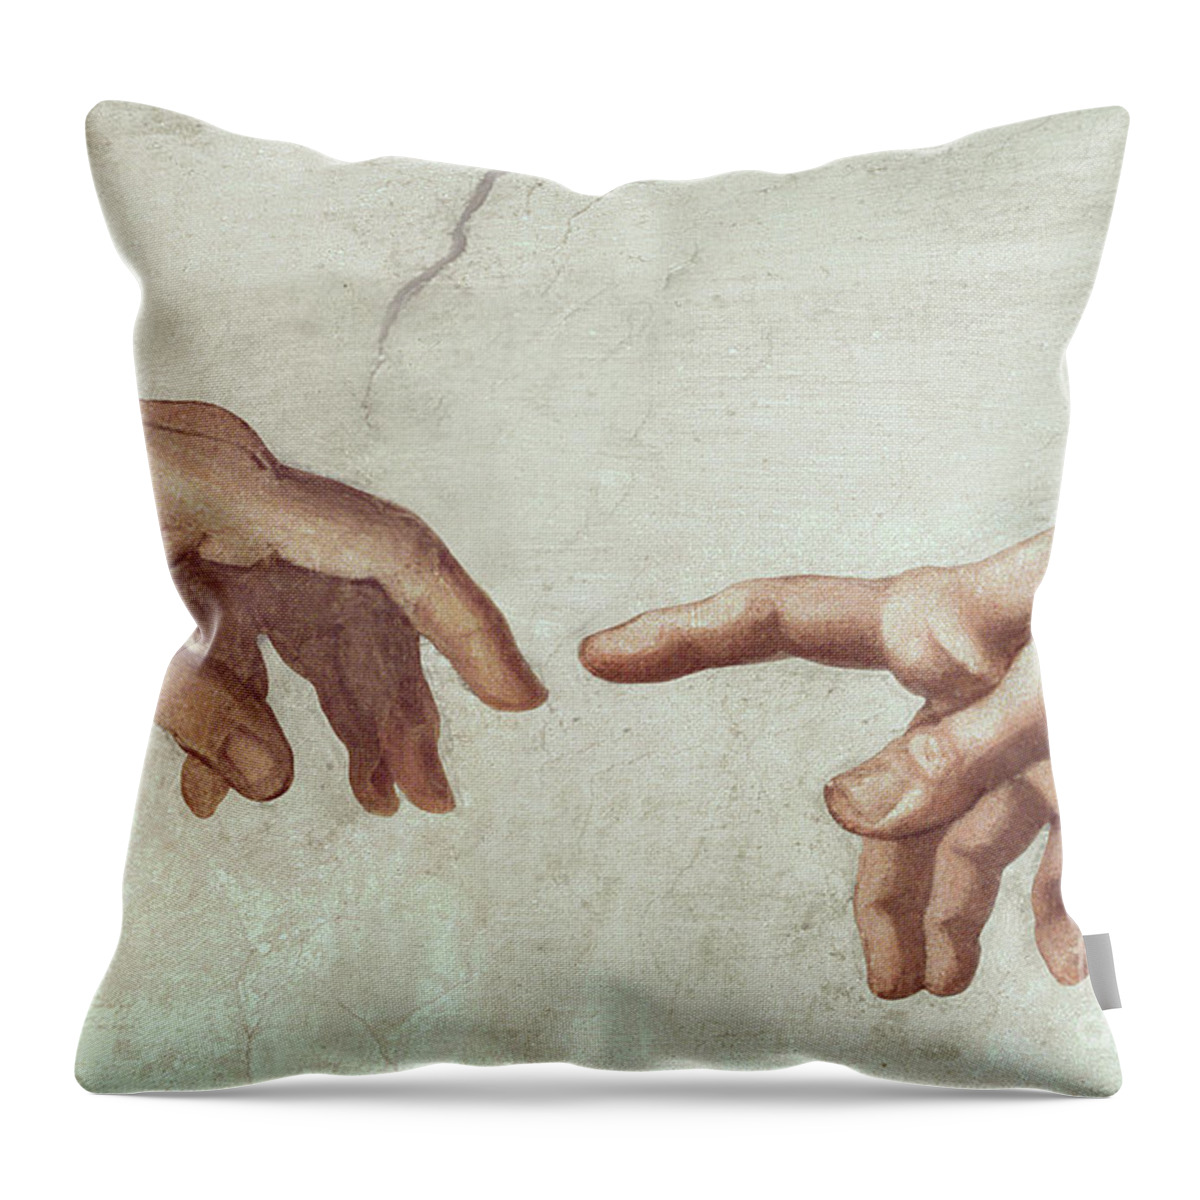 Sistine Throw Pillow featuring the painting Hands of God and Adam by Michelangelo by Michelangelo Buonarroti